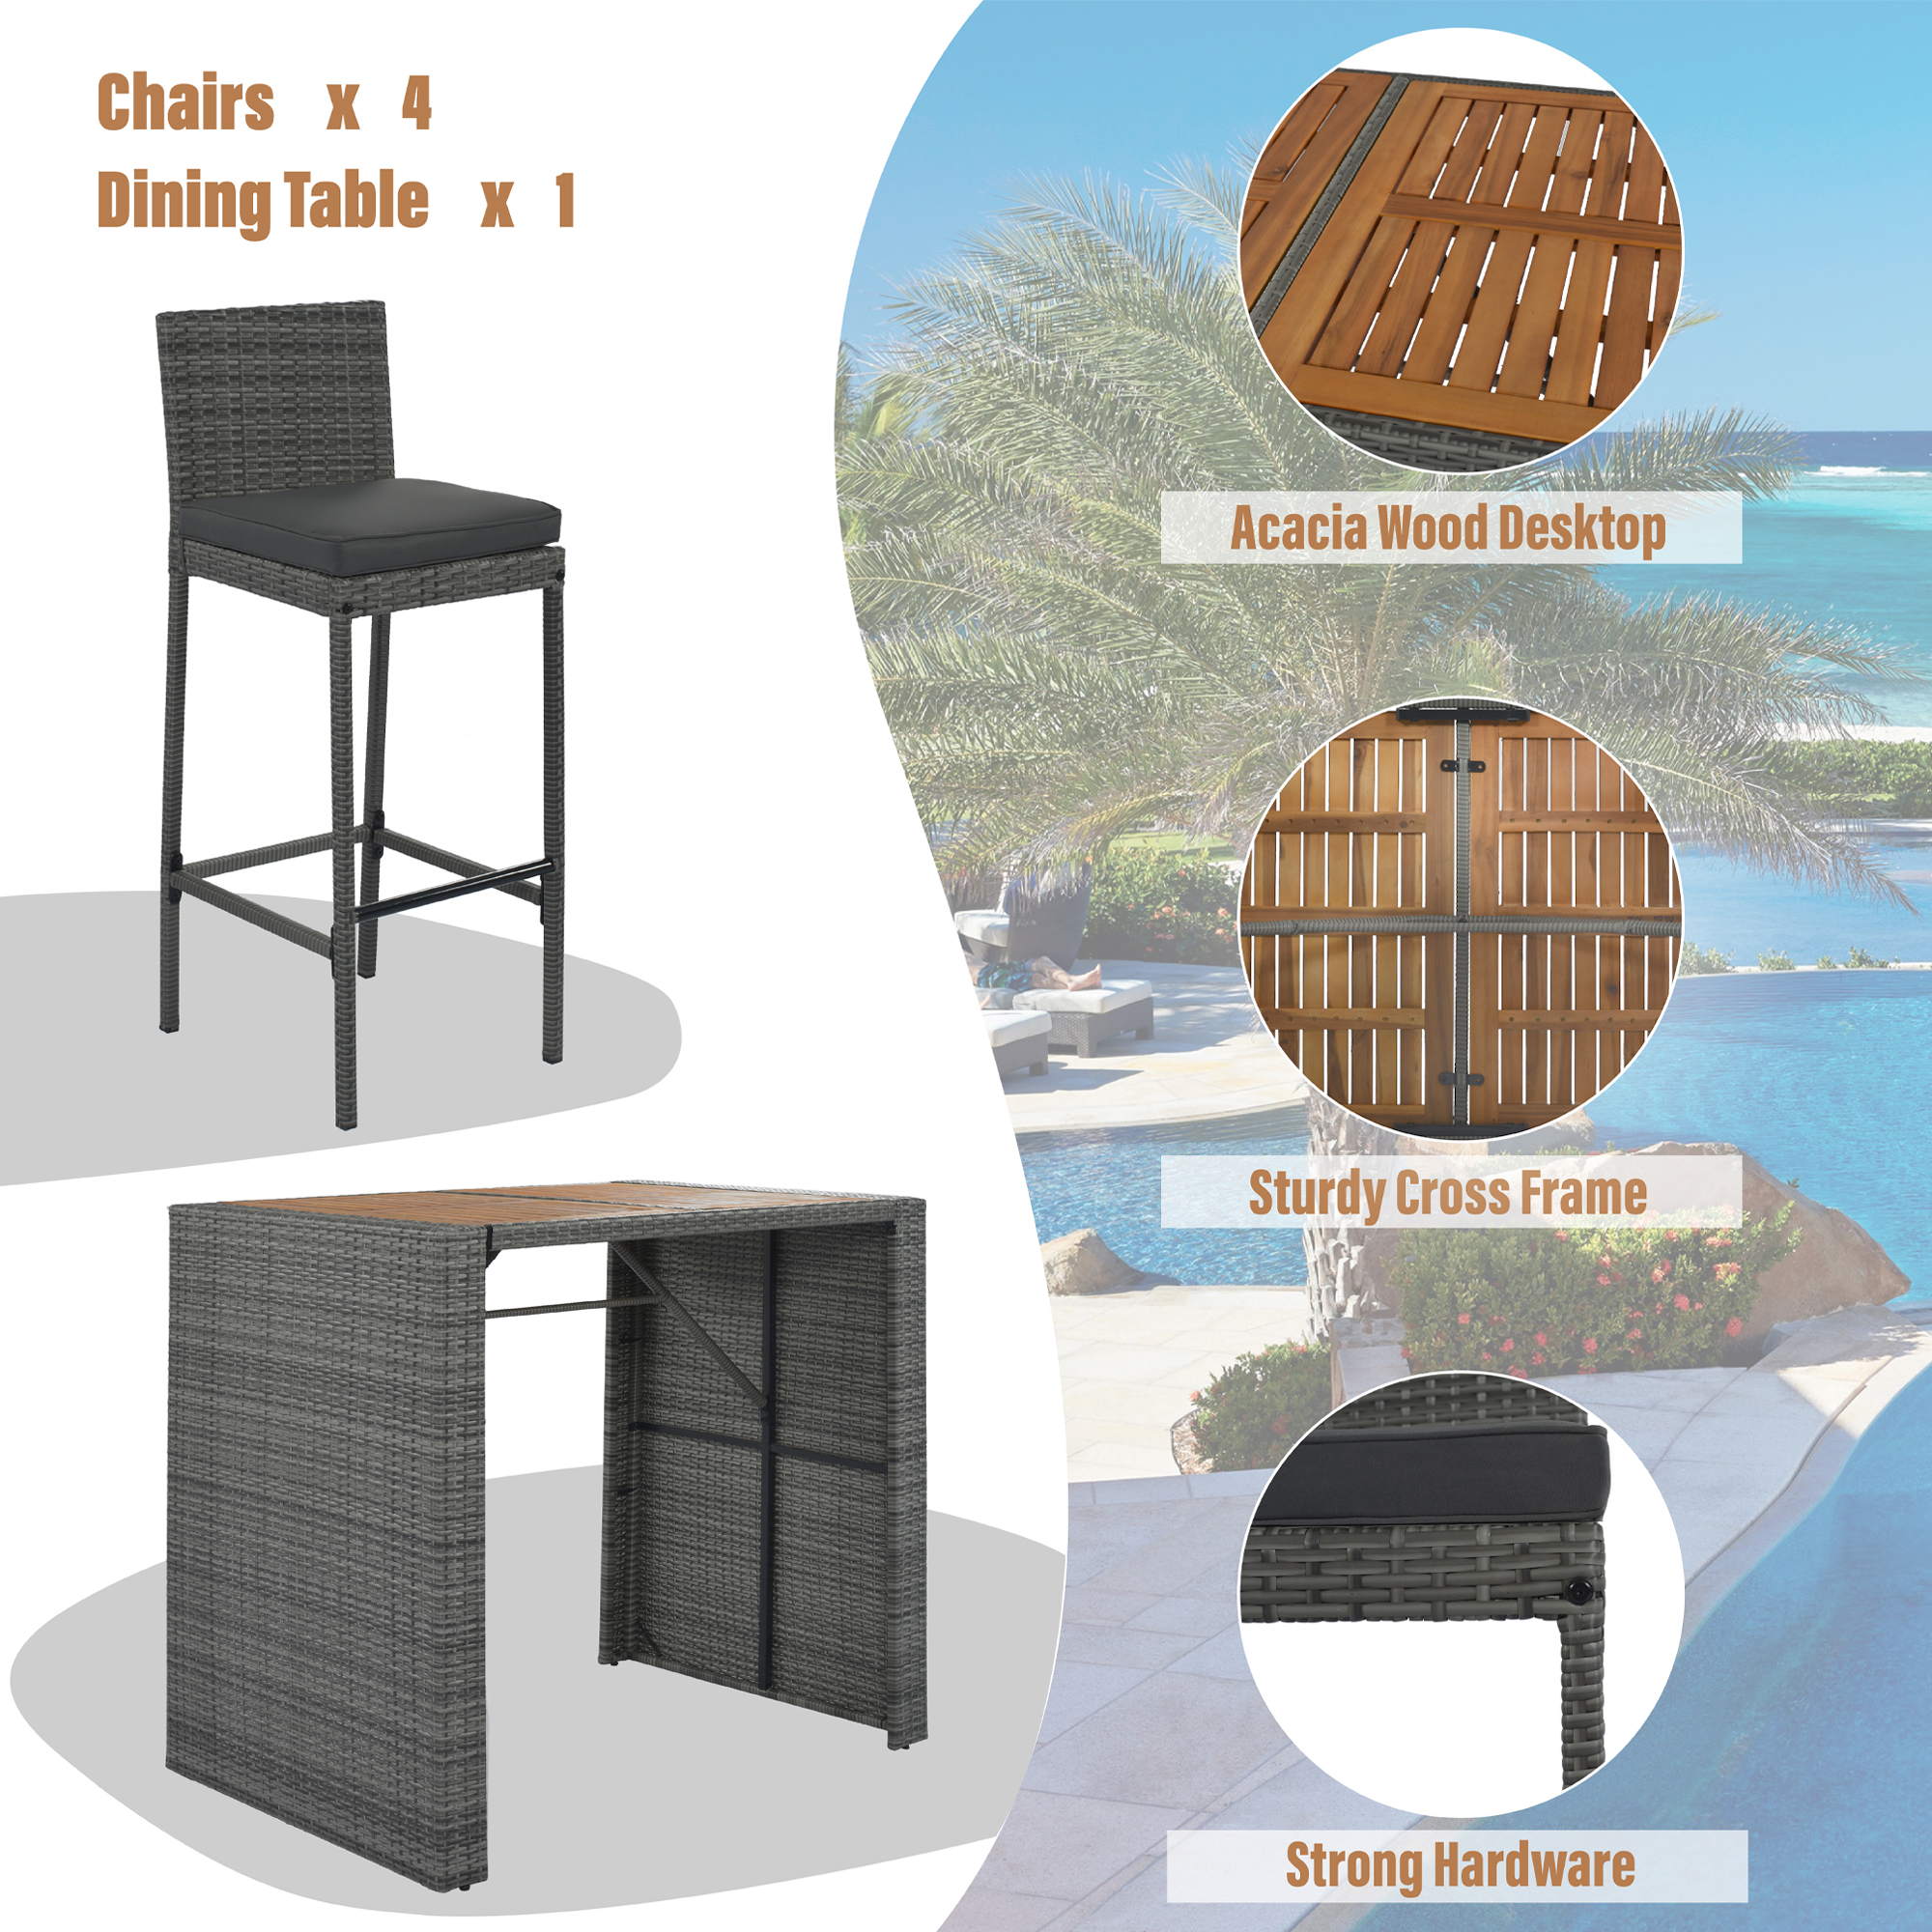 5-pieces Outdoor Patio Wicker Bar Set, Bar Height Chairs With Feet And Fixed Rope, Removable Cushion, Acacia Wood Table , Brown Wood And Gray Wicker - image 3 of 10